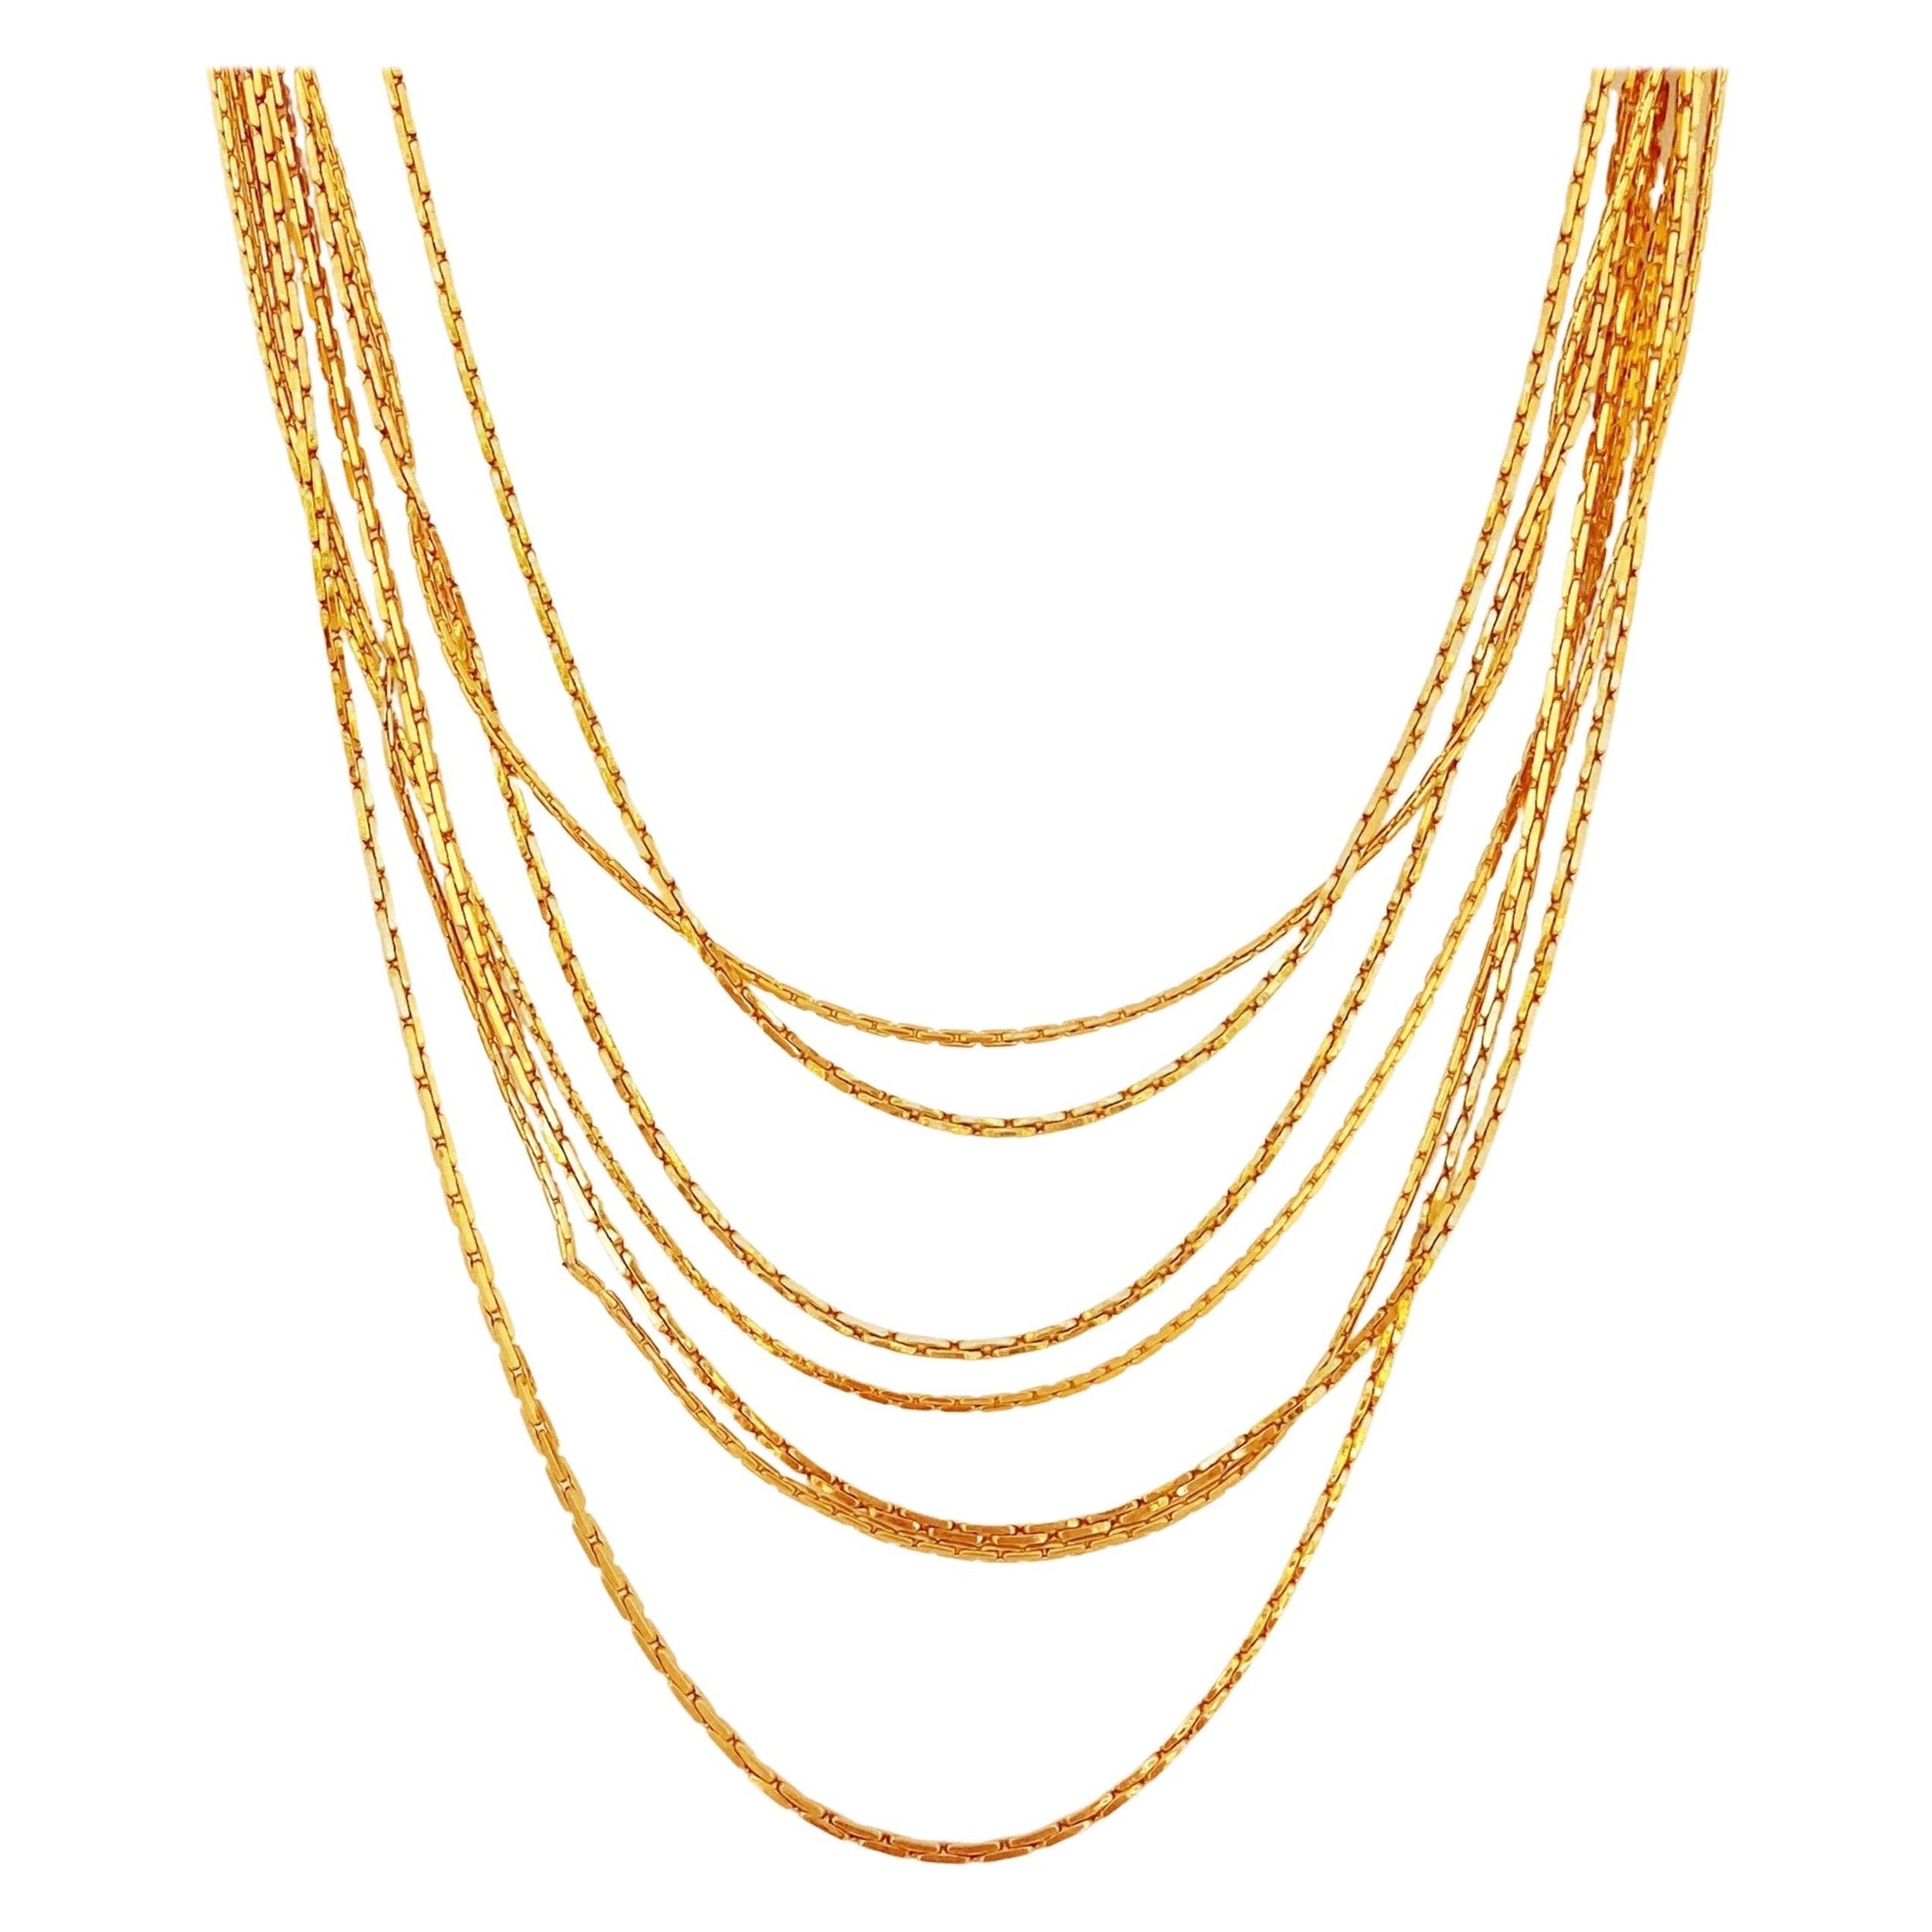 Gold Seven Strand Slinky Chain Necklace By Napier, 1970s For Sale